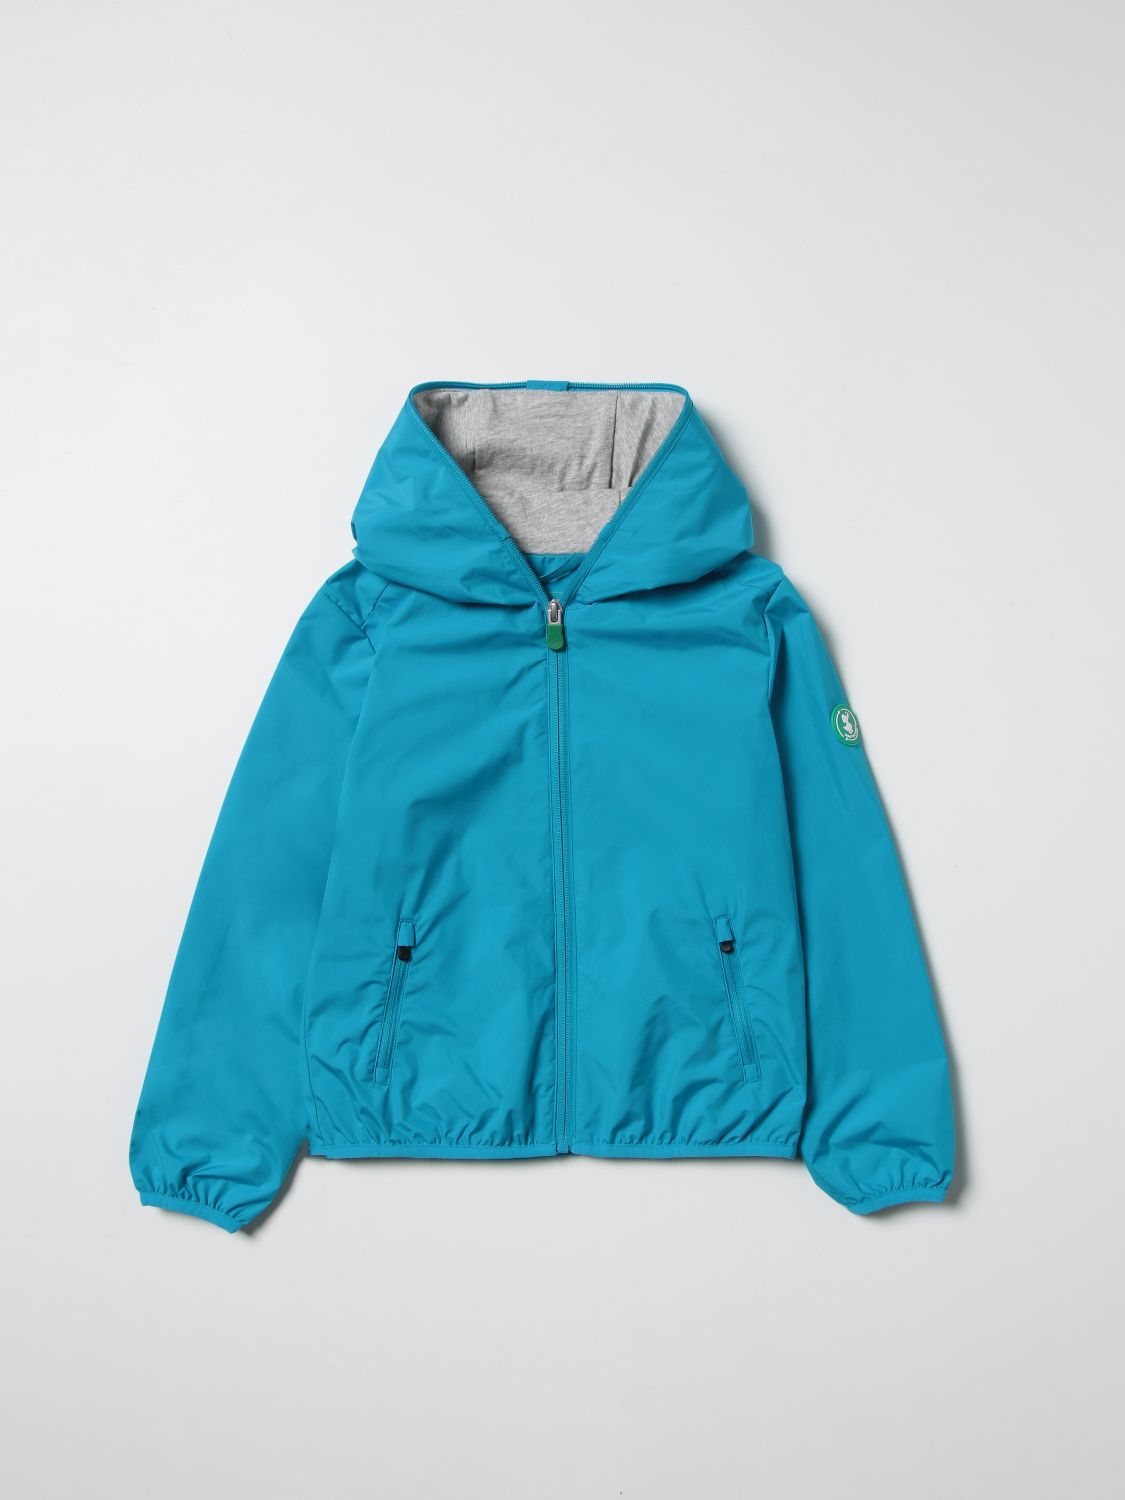 Jacket Save The Duck: Jacket kids Save The Duck sky blue 1